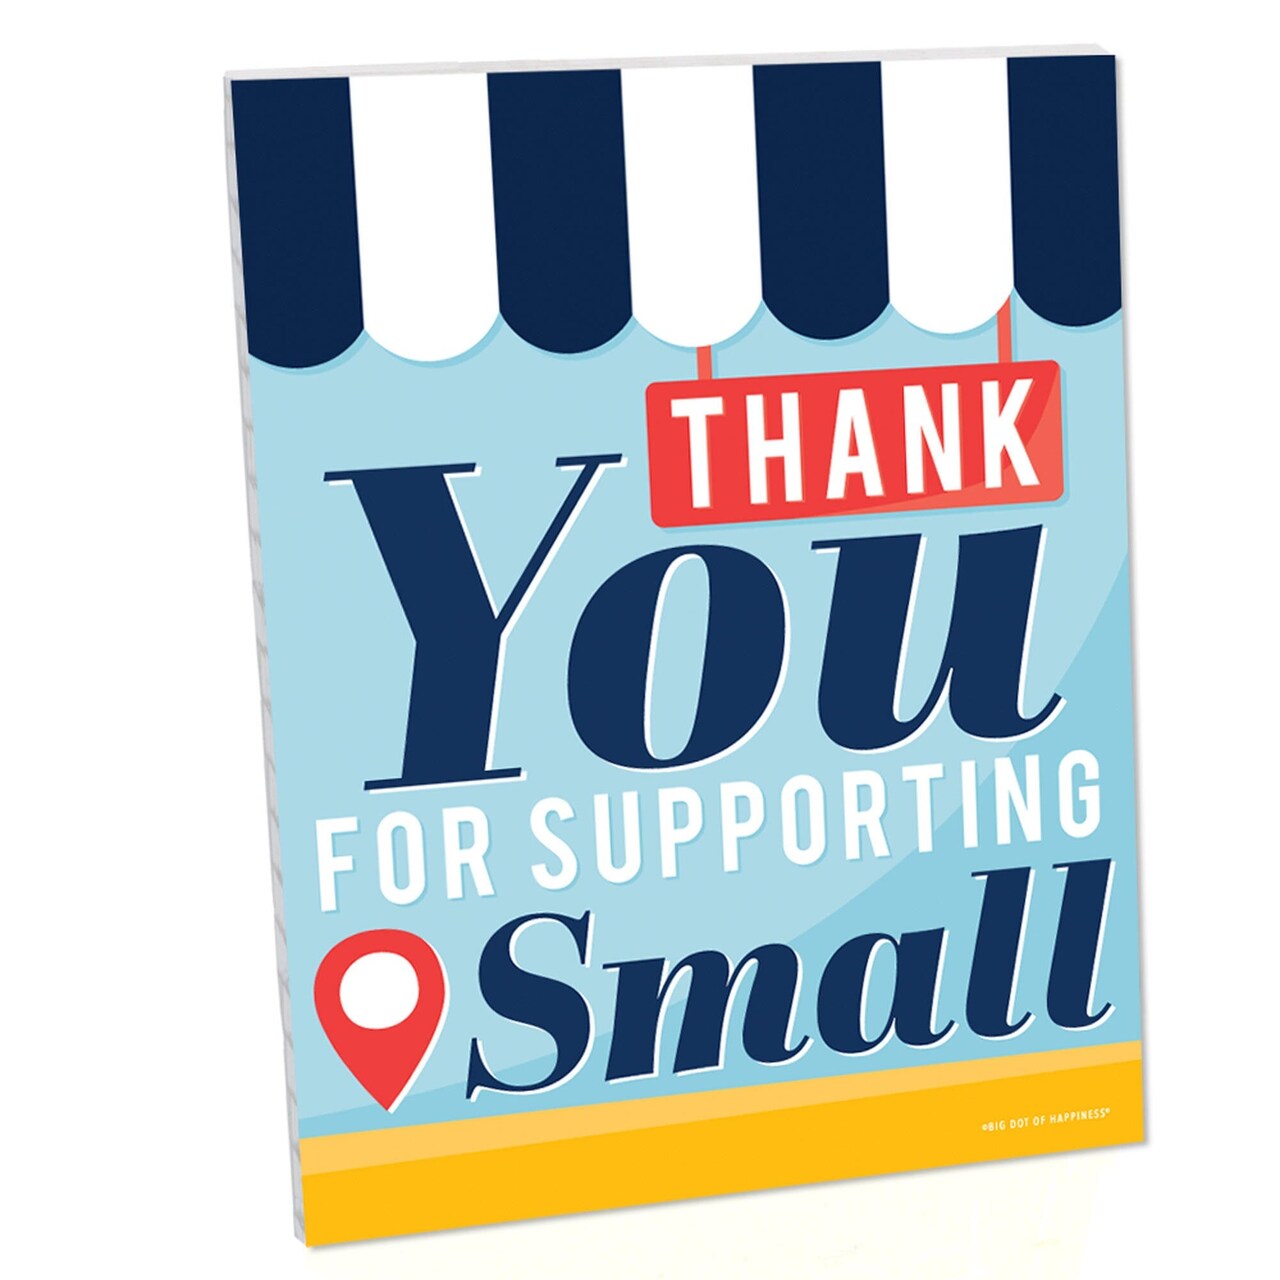 Big Dot of Happiness Support Small Business Sign - Thank You Decor - Printed on Sturdy Plastic Material - 10.5 x 13.75 inches - Sign with Stand - 1 Pc